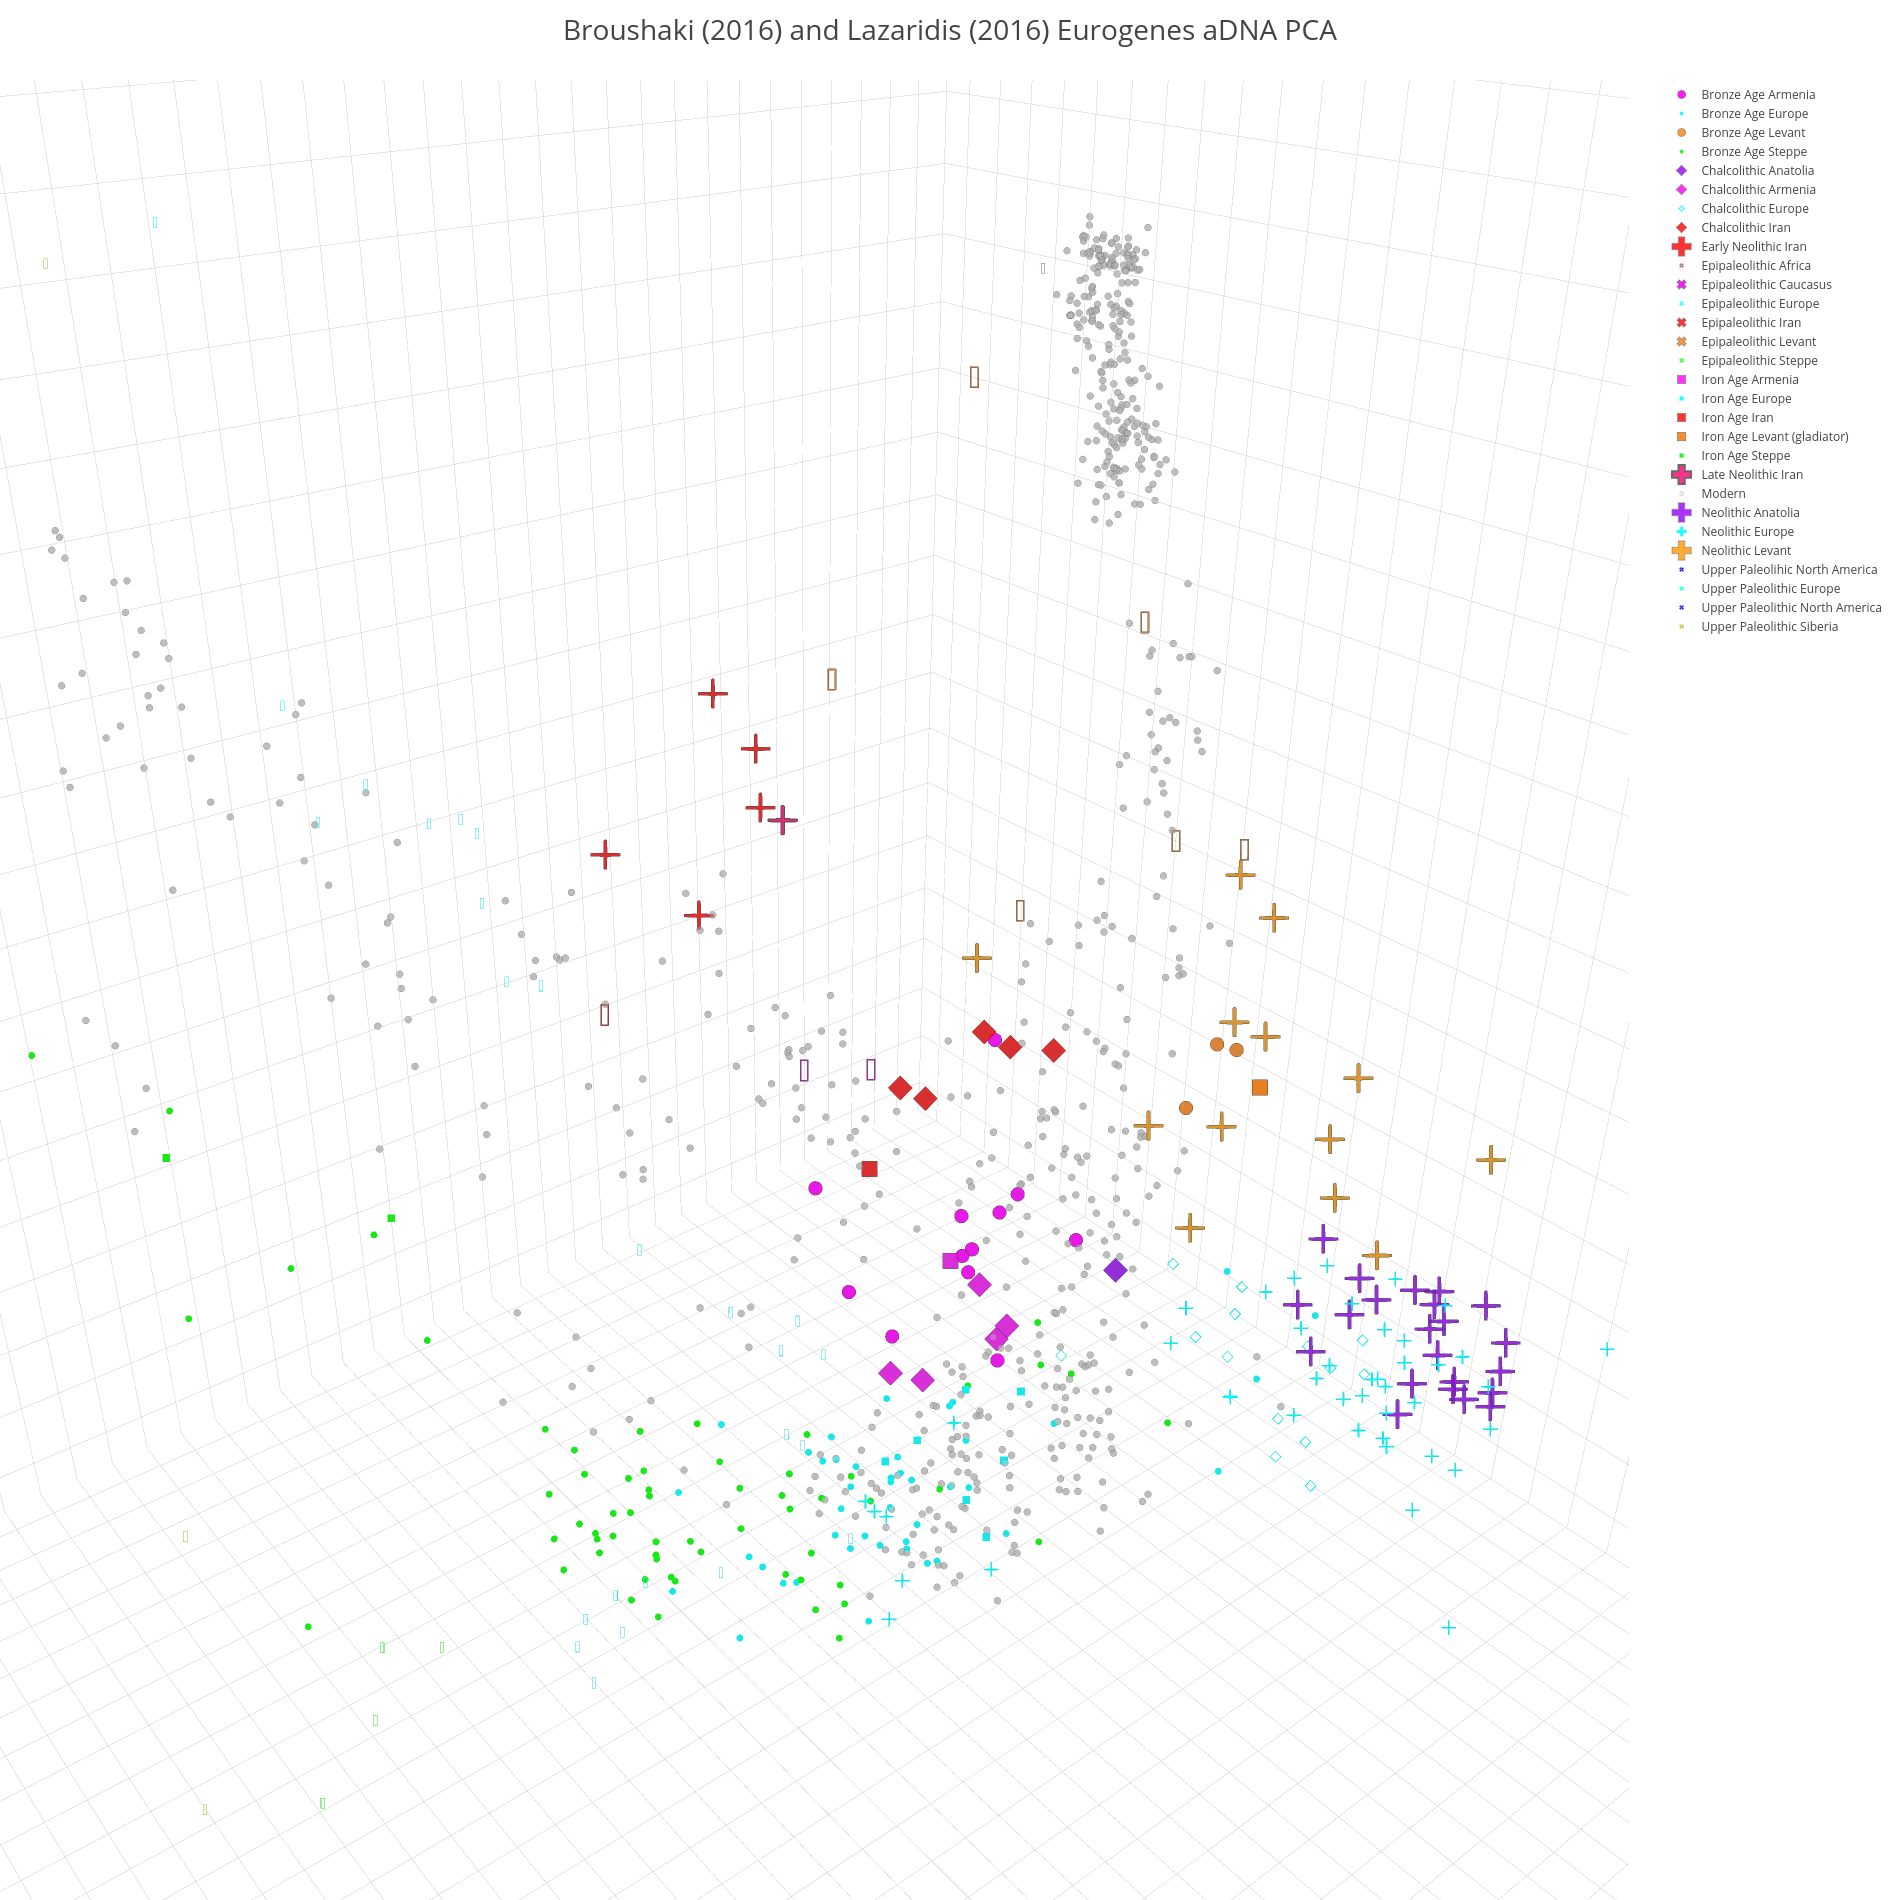  Broushaki (2016) and Lazaridis (2016) Eurogenes aDNA PCA | scatter3d made by Open_genomes | plotly